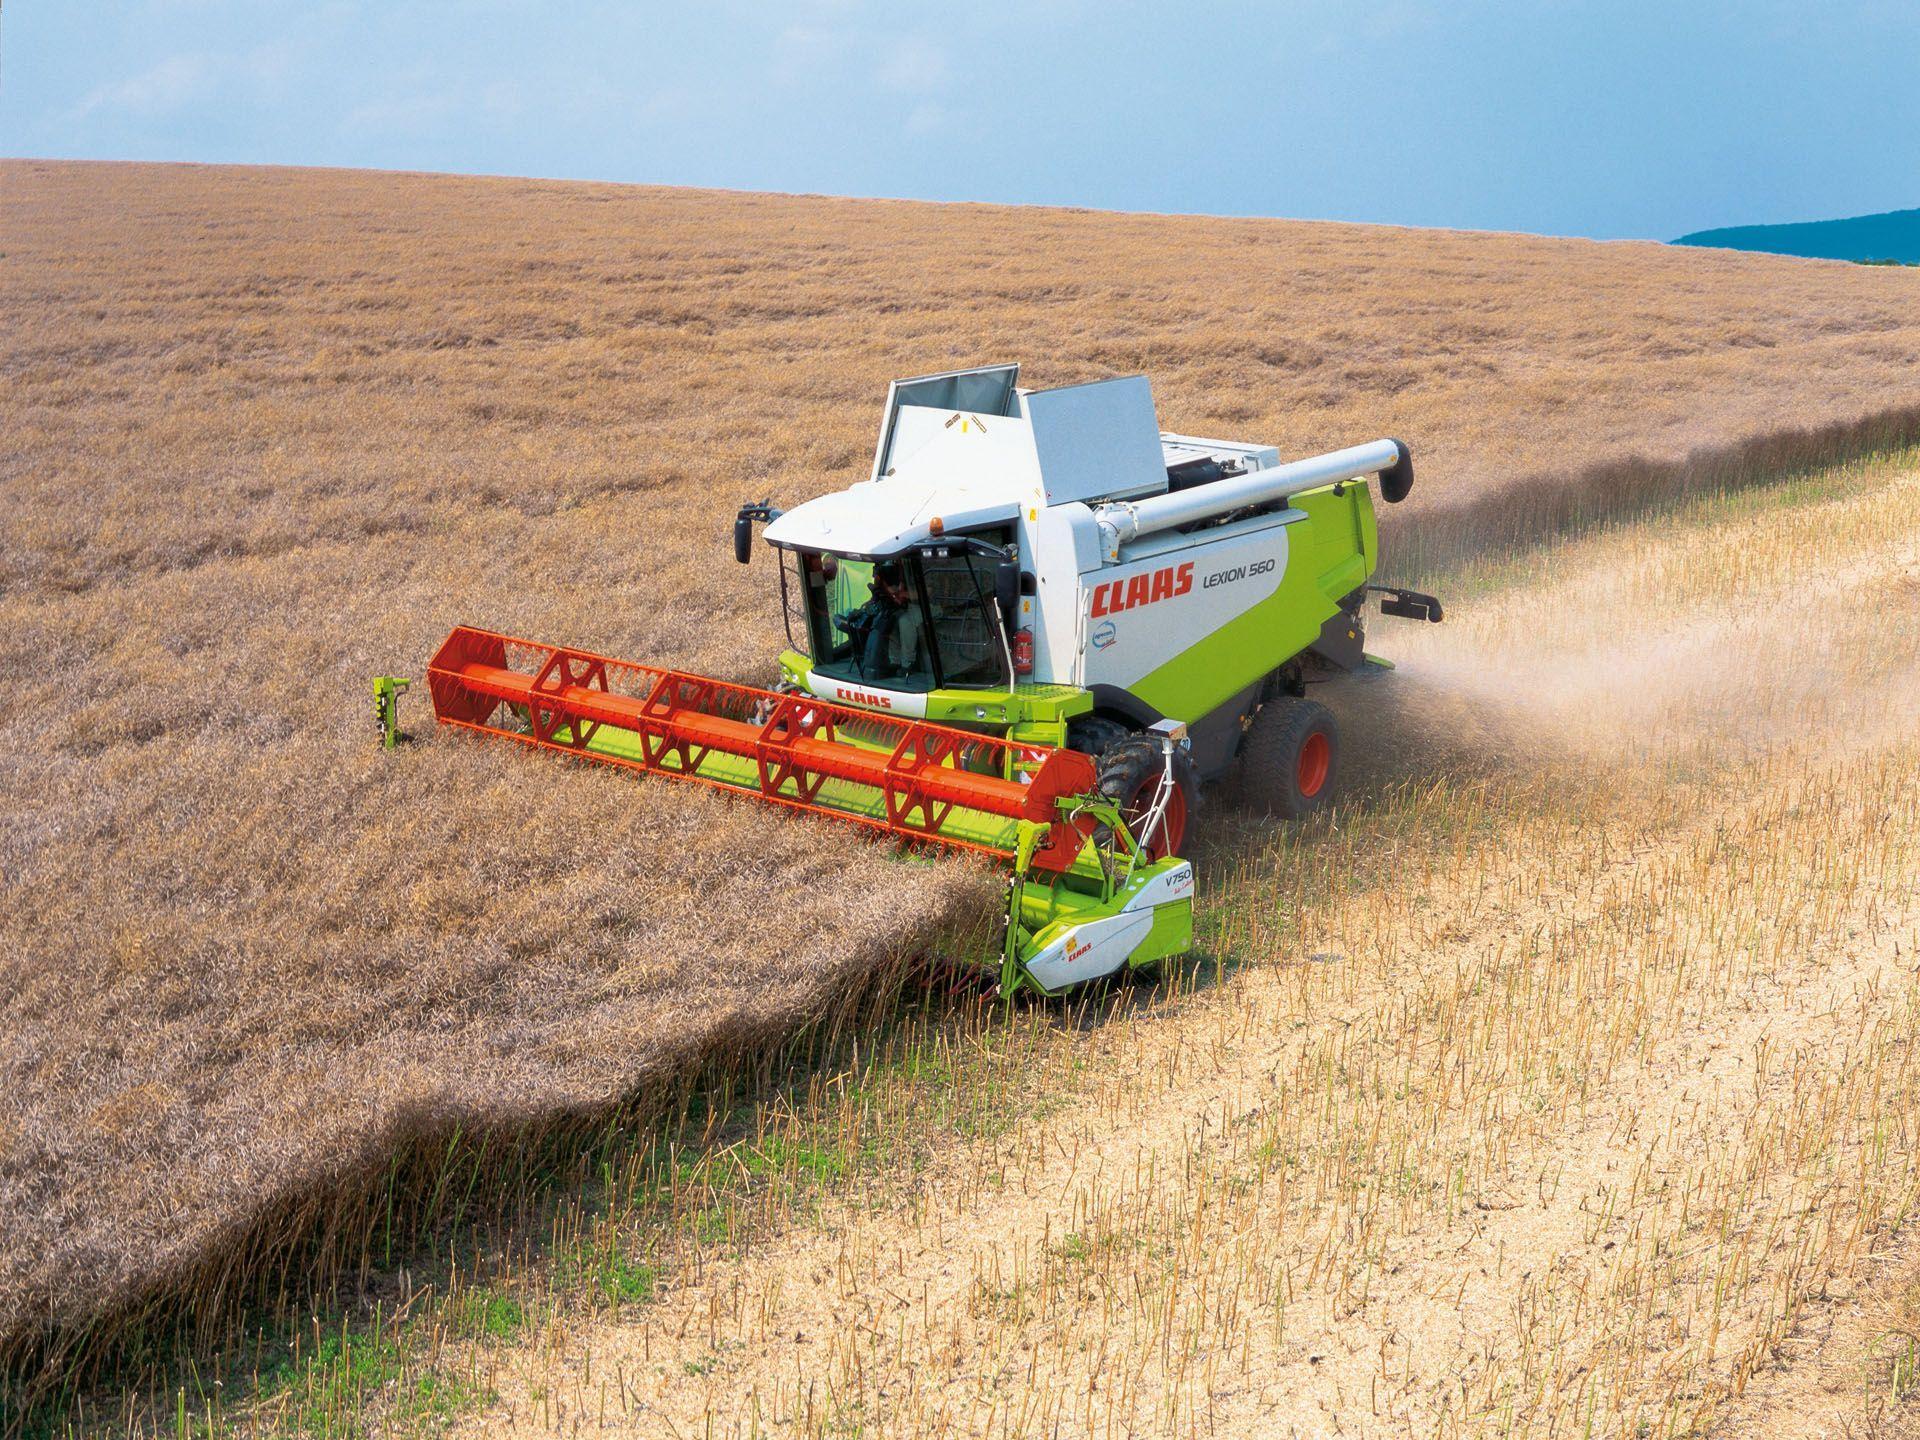 Claas Lexion picture # 54747. Claas photo gallery